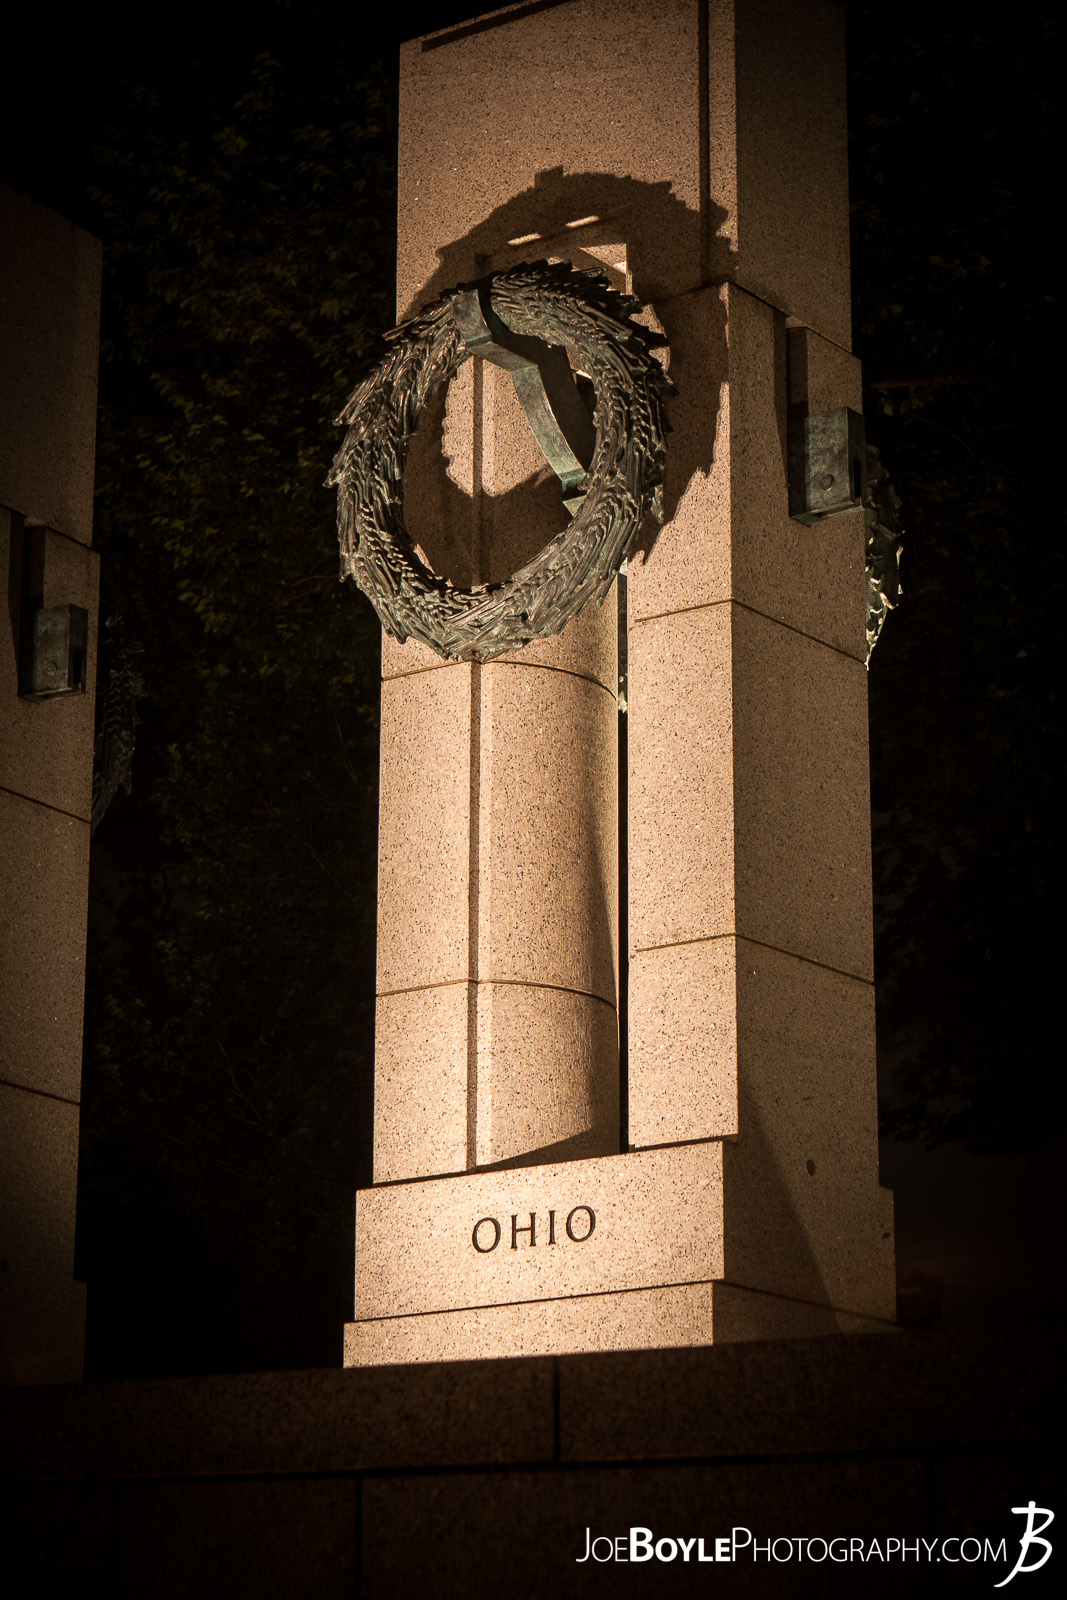  While I was in Washington, DC I was able to take some great night images of a few of the iconic landmarks that make up this city! Here is an image of the Ohio pillar at the World War II Memorial! 